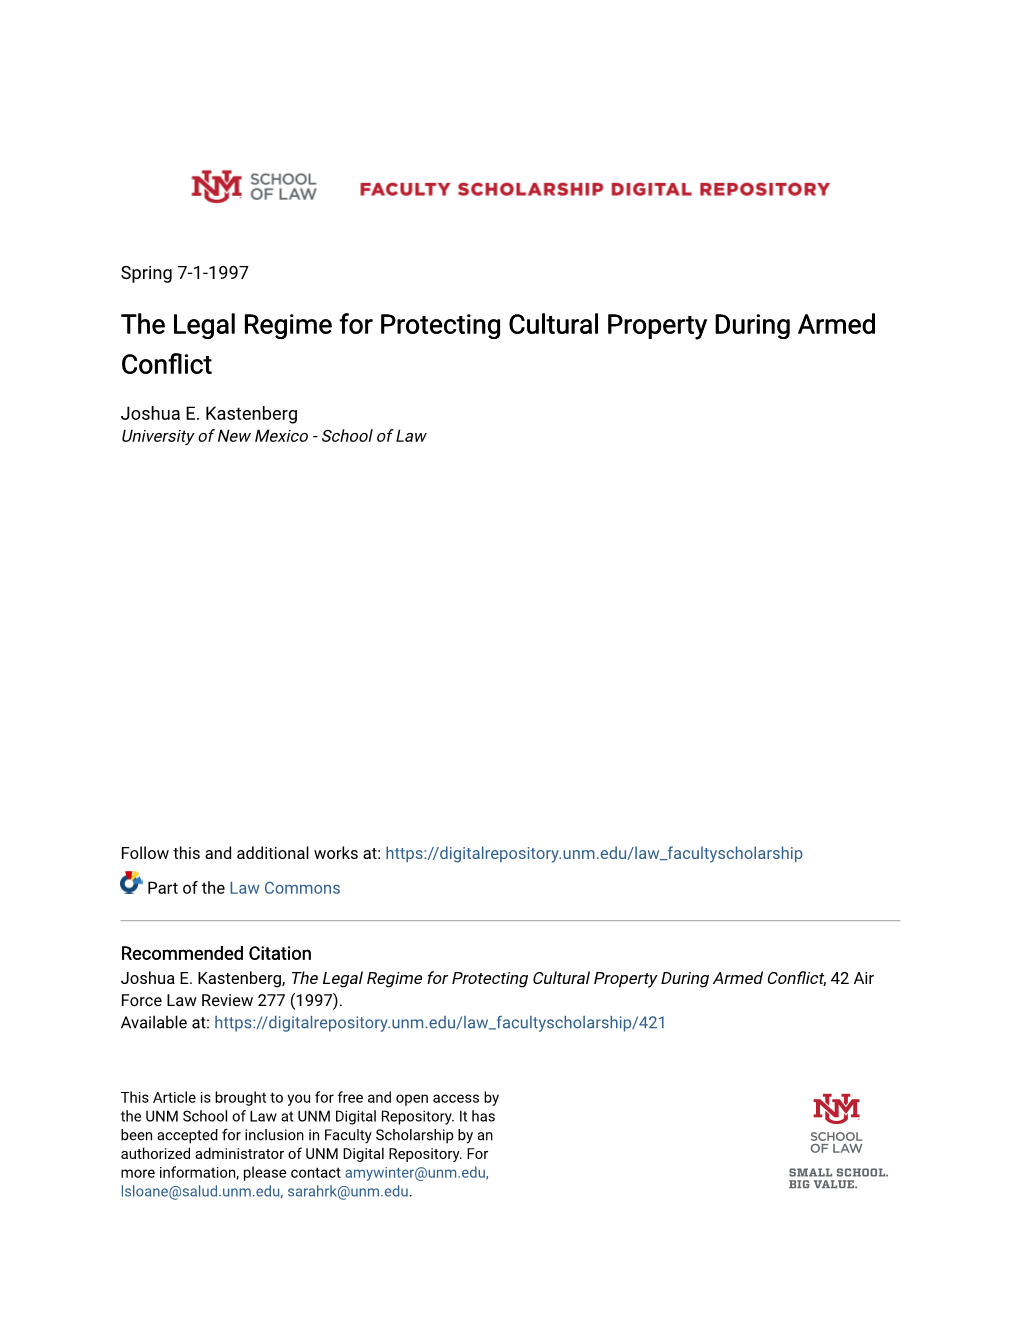 The Legal Regime for Protecting Cultural Property During Armed Conflict